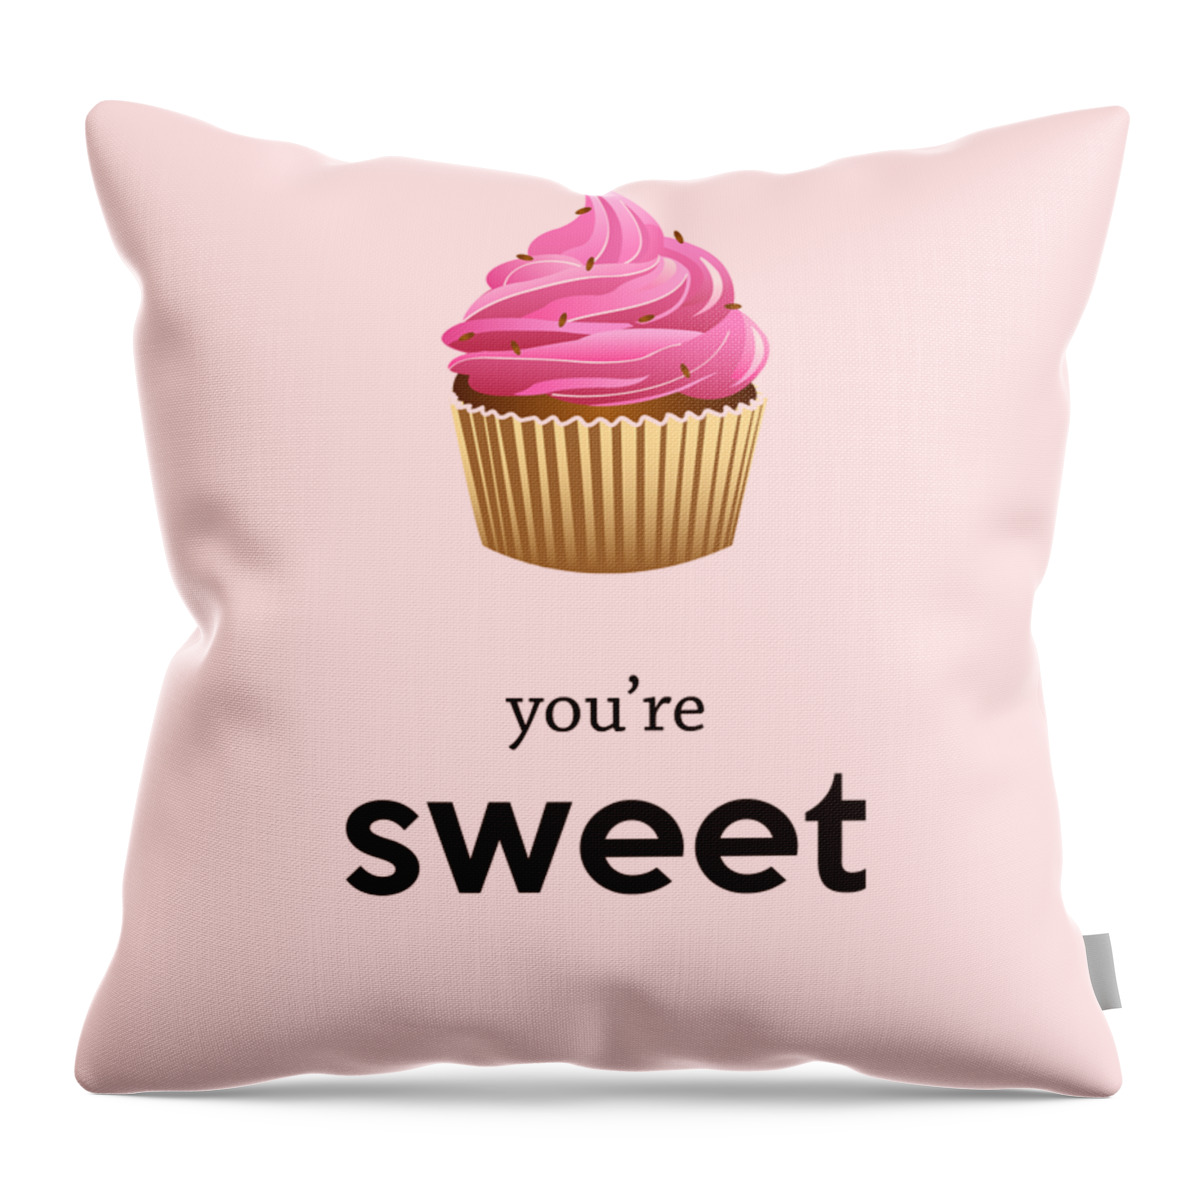 Text Throw Pillow featuring the digital art Pink Cupcake Decor by Madame Memento